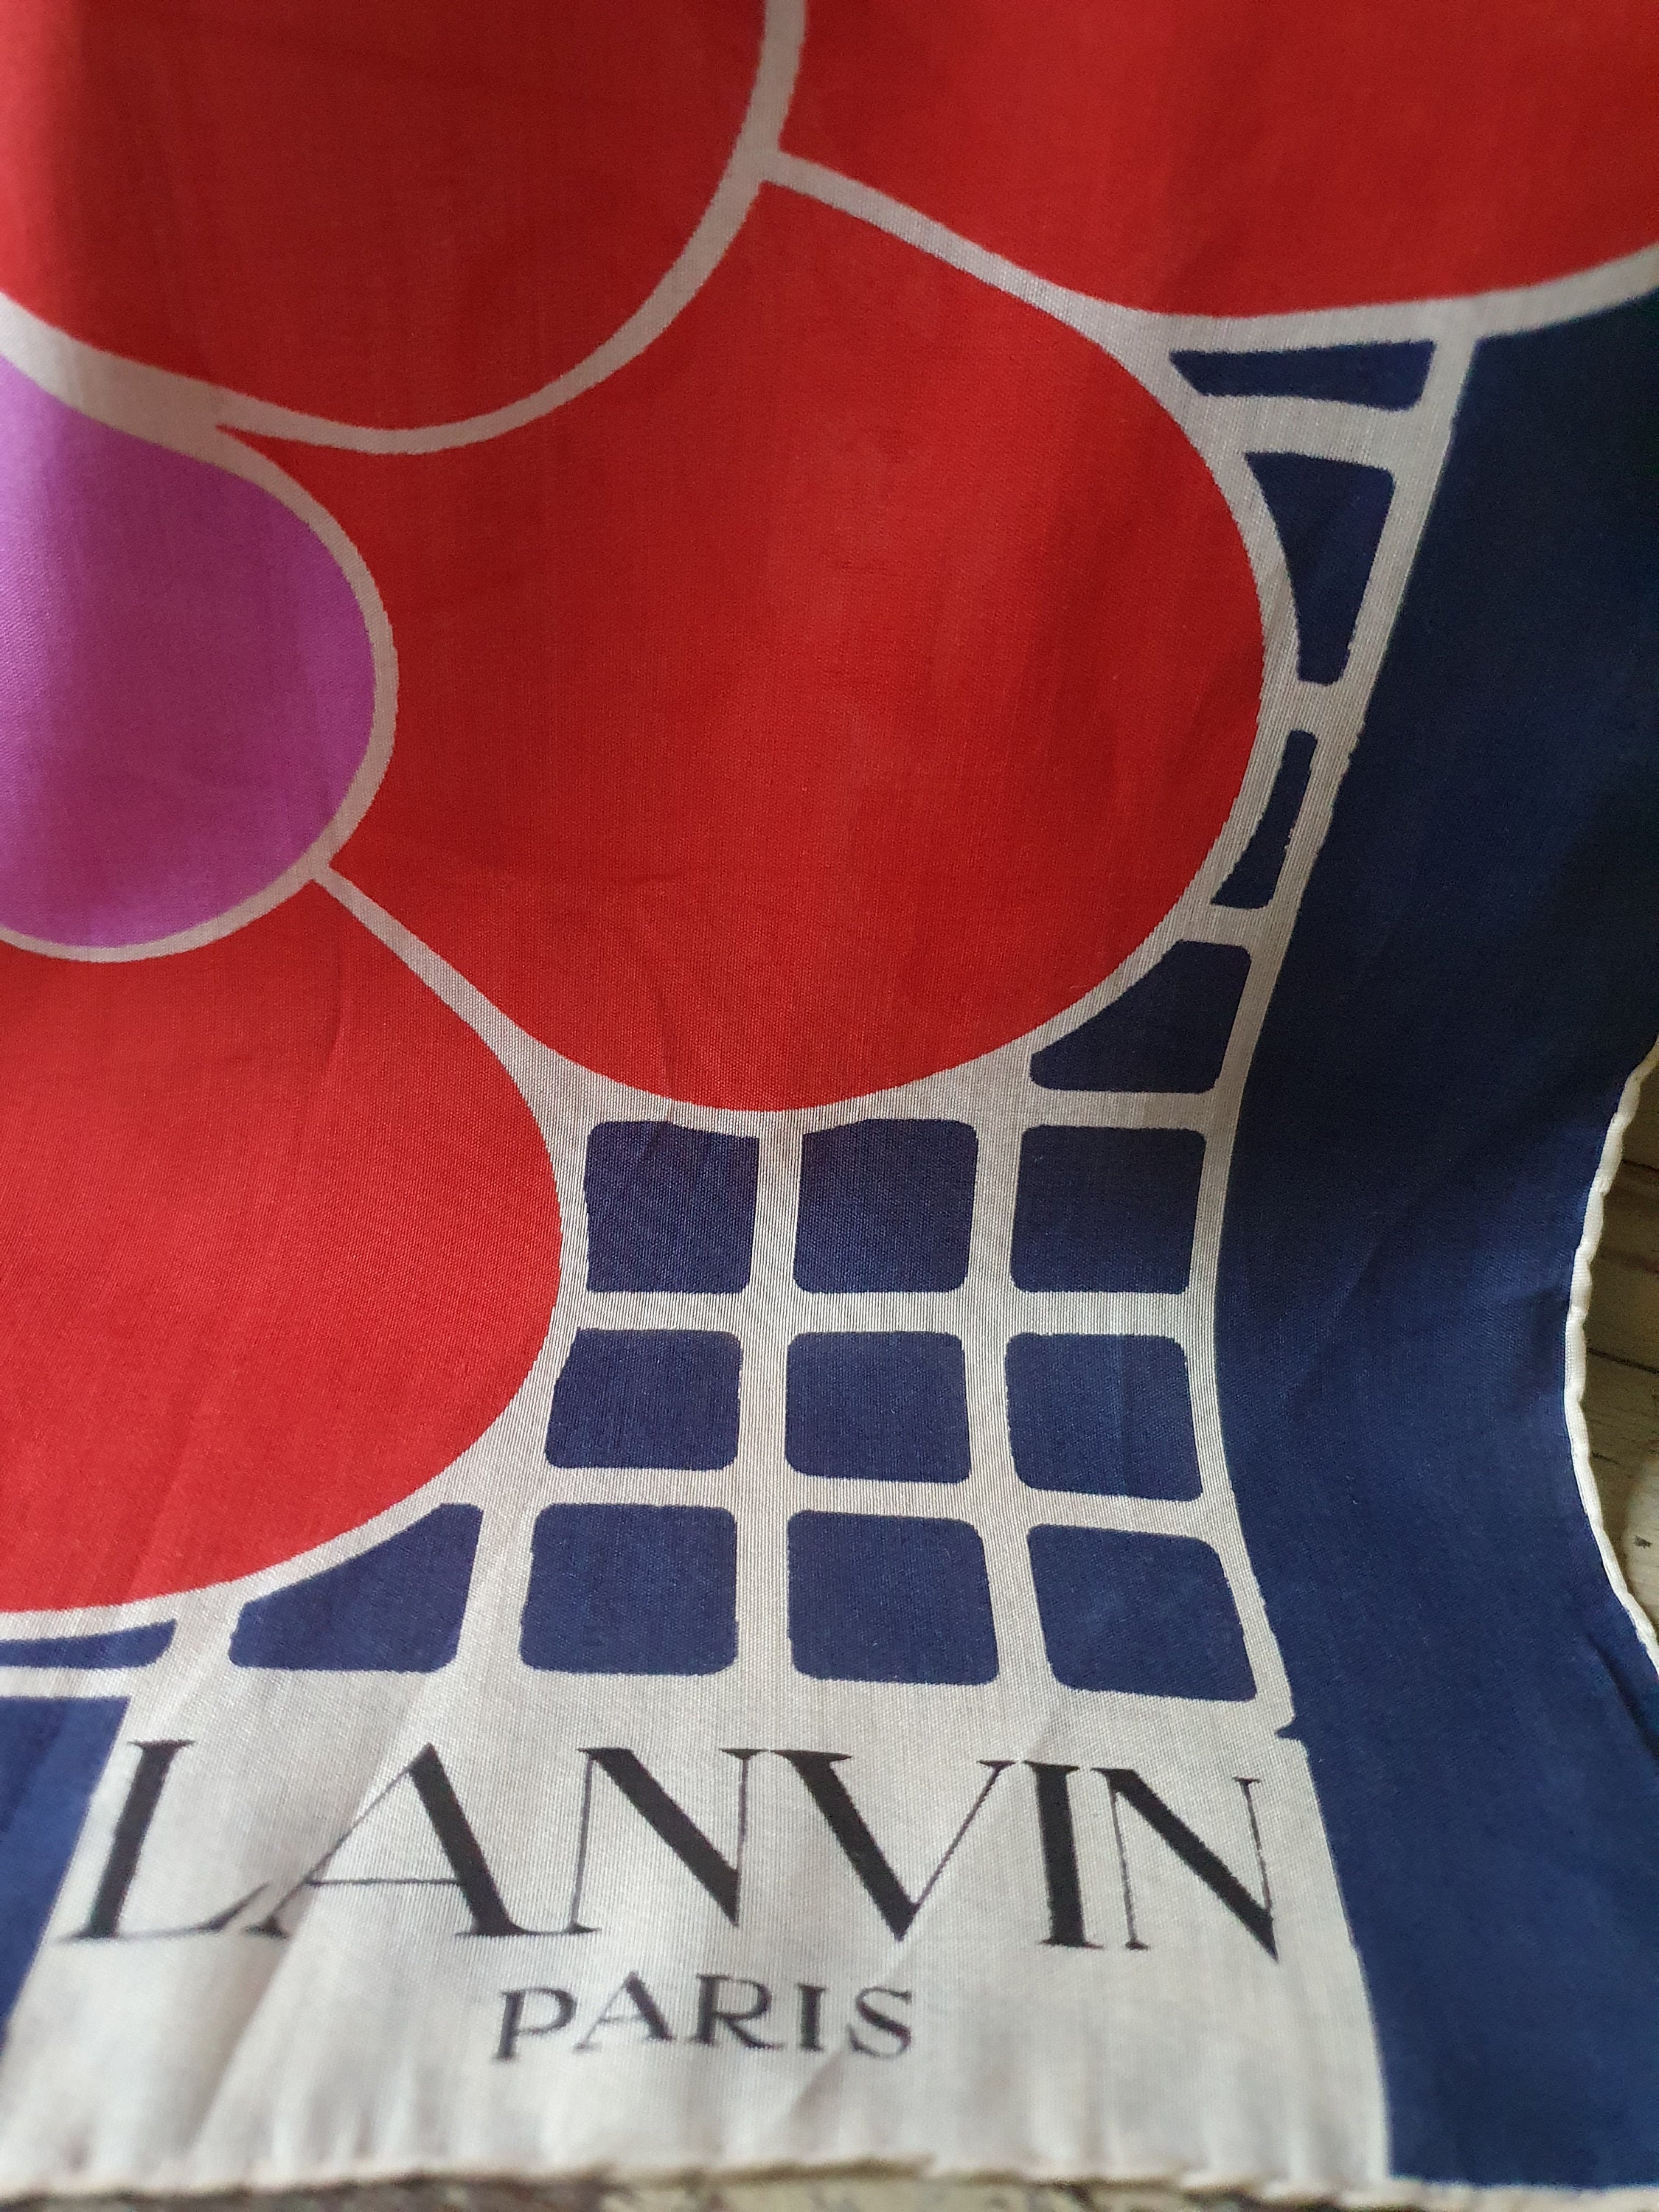 Lanvin silk square dotts and balls - 1990s secondhand Lysis